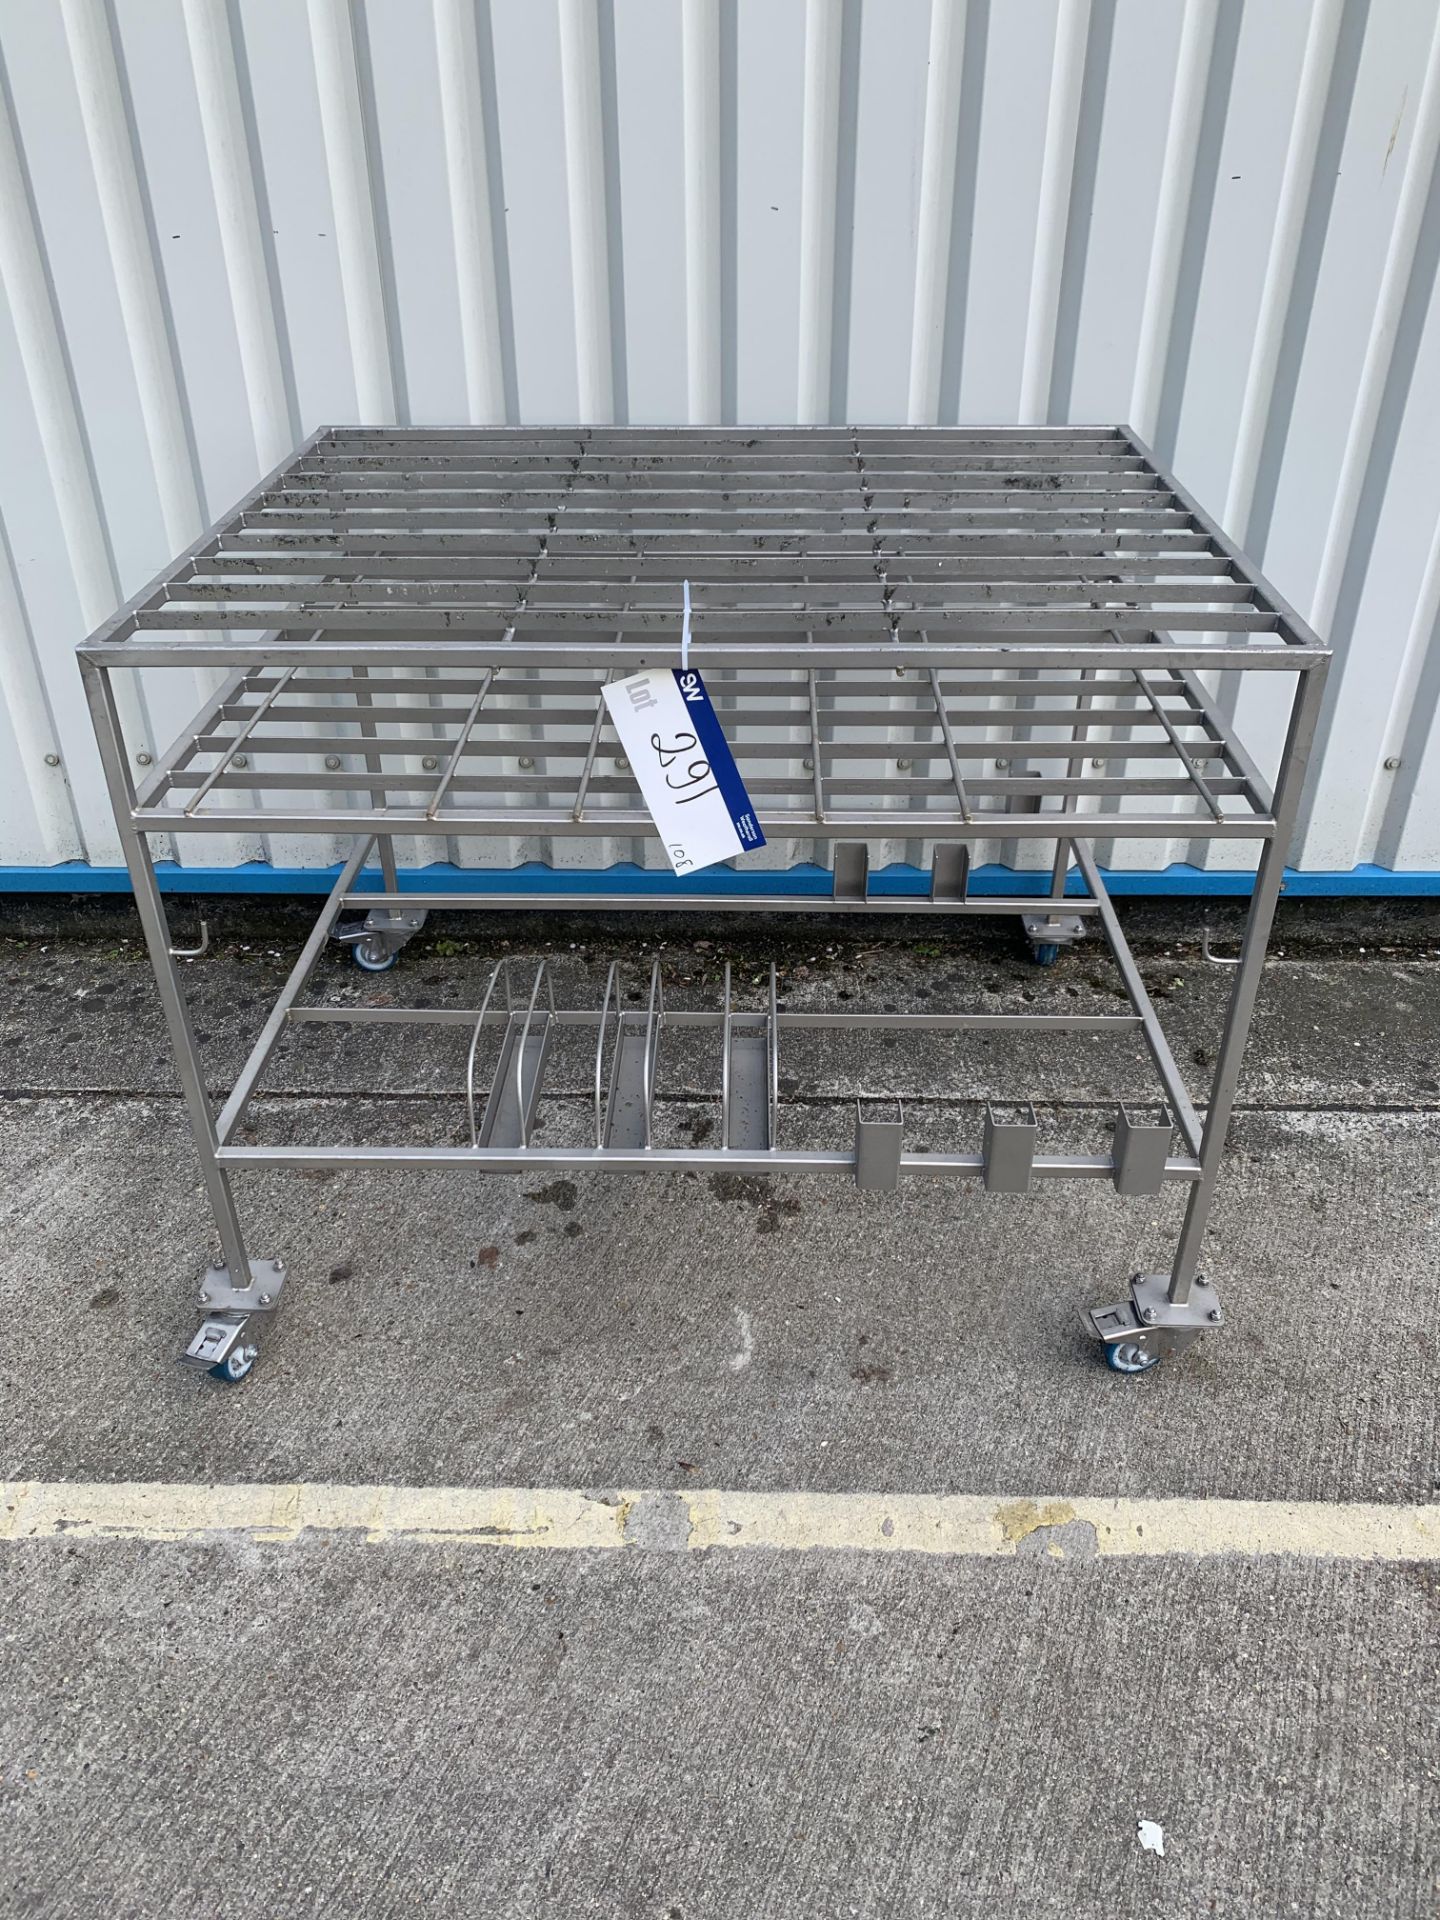 Stainless Steel Mobile Trolley, approx. 1.2m long x 0.95m wide x 1m high, lift out charge - £5